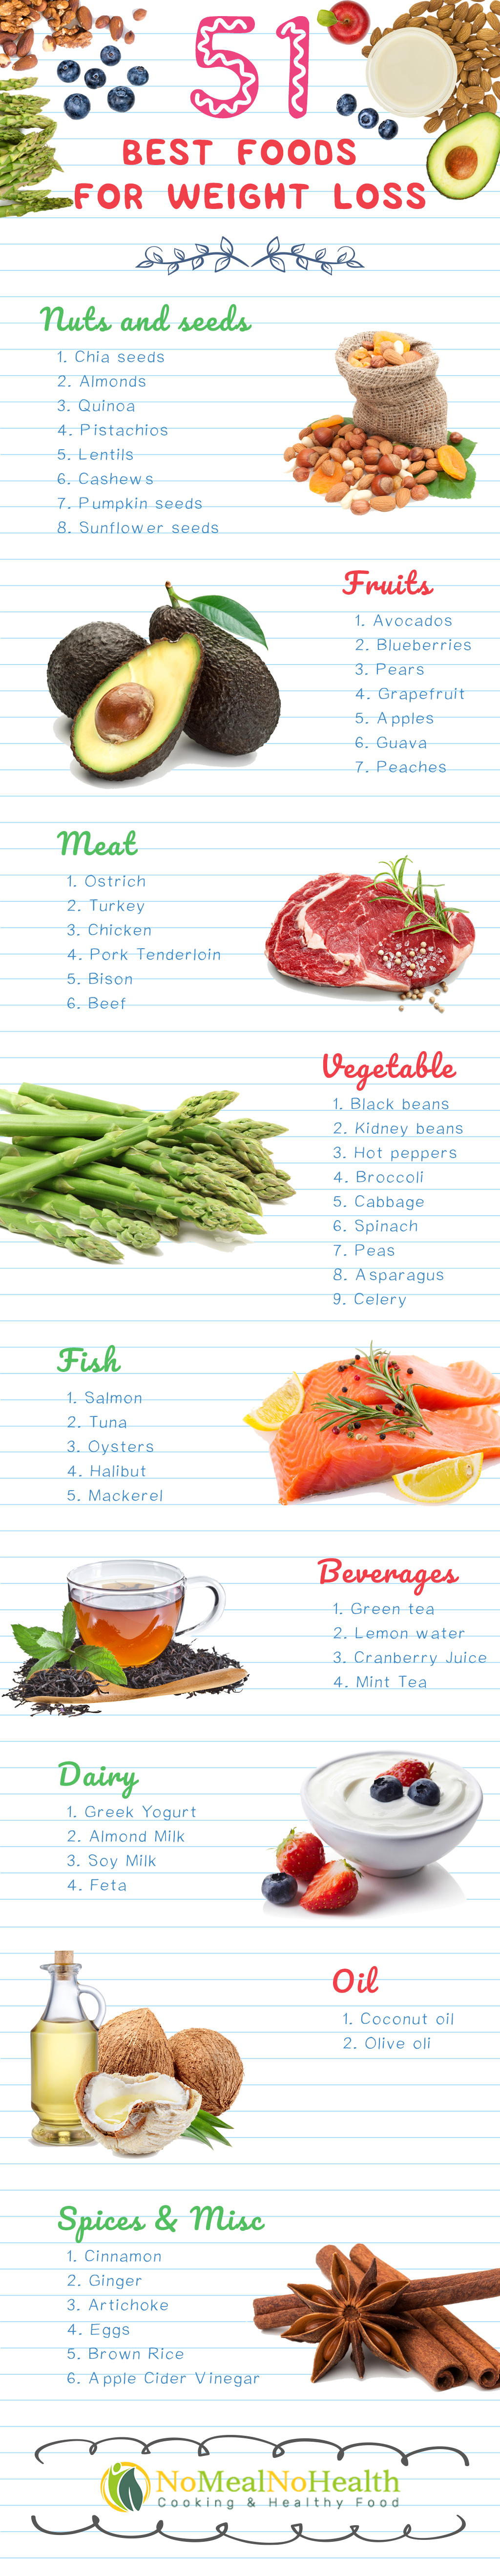 51 Healthy and Delicious Weight Loss Foods - Infographic